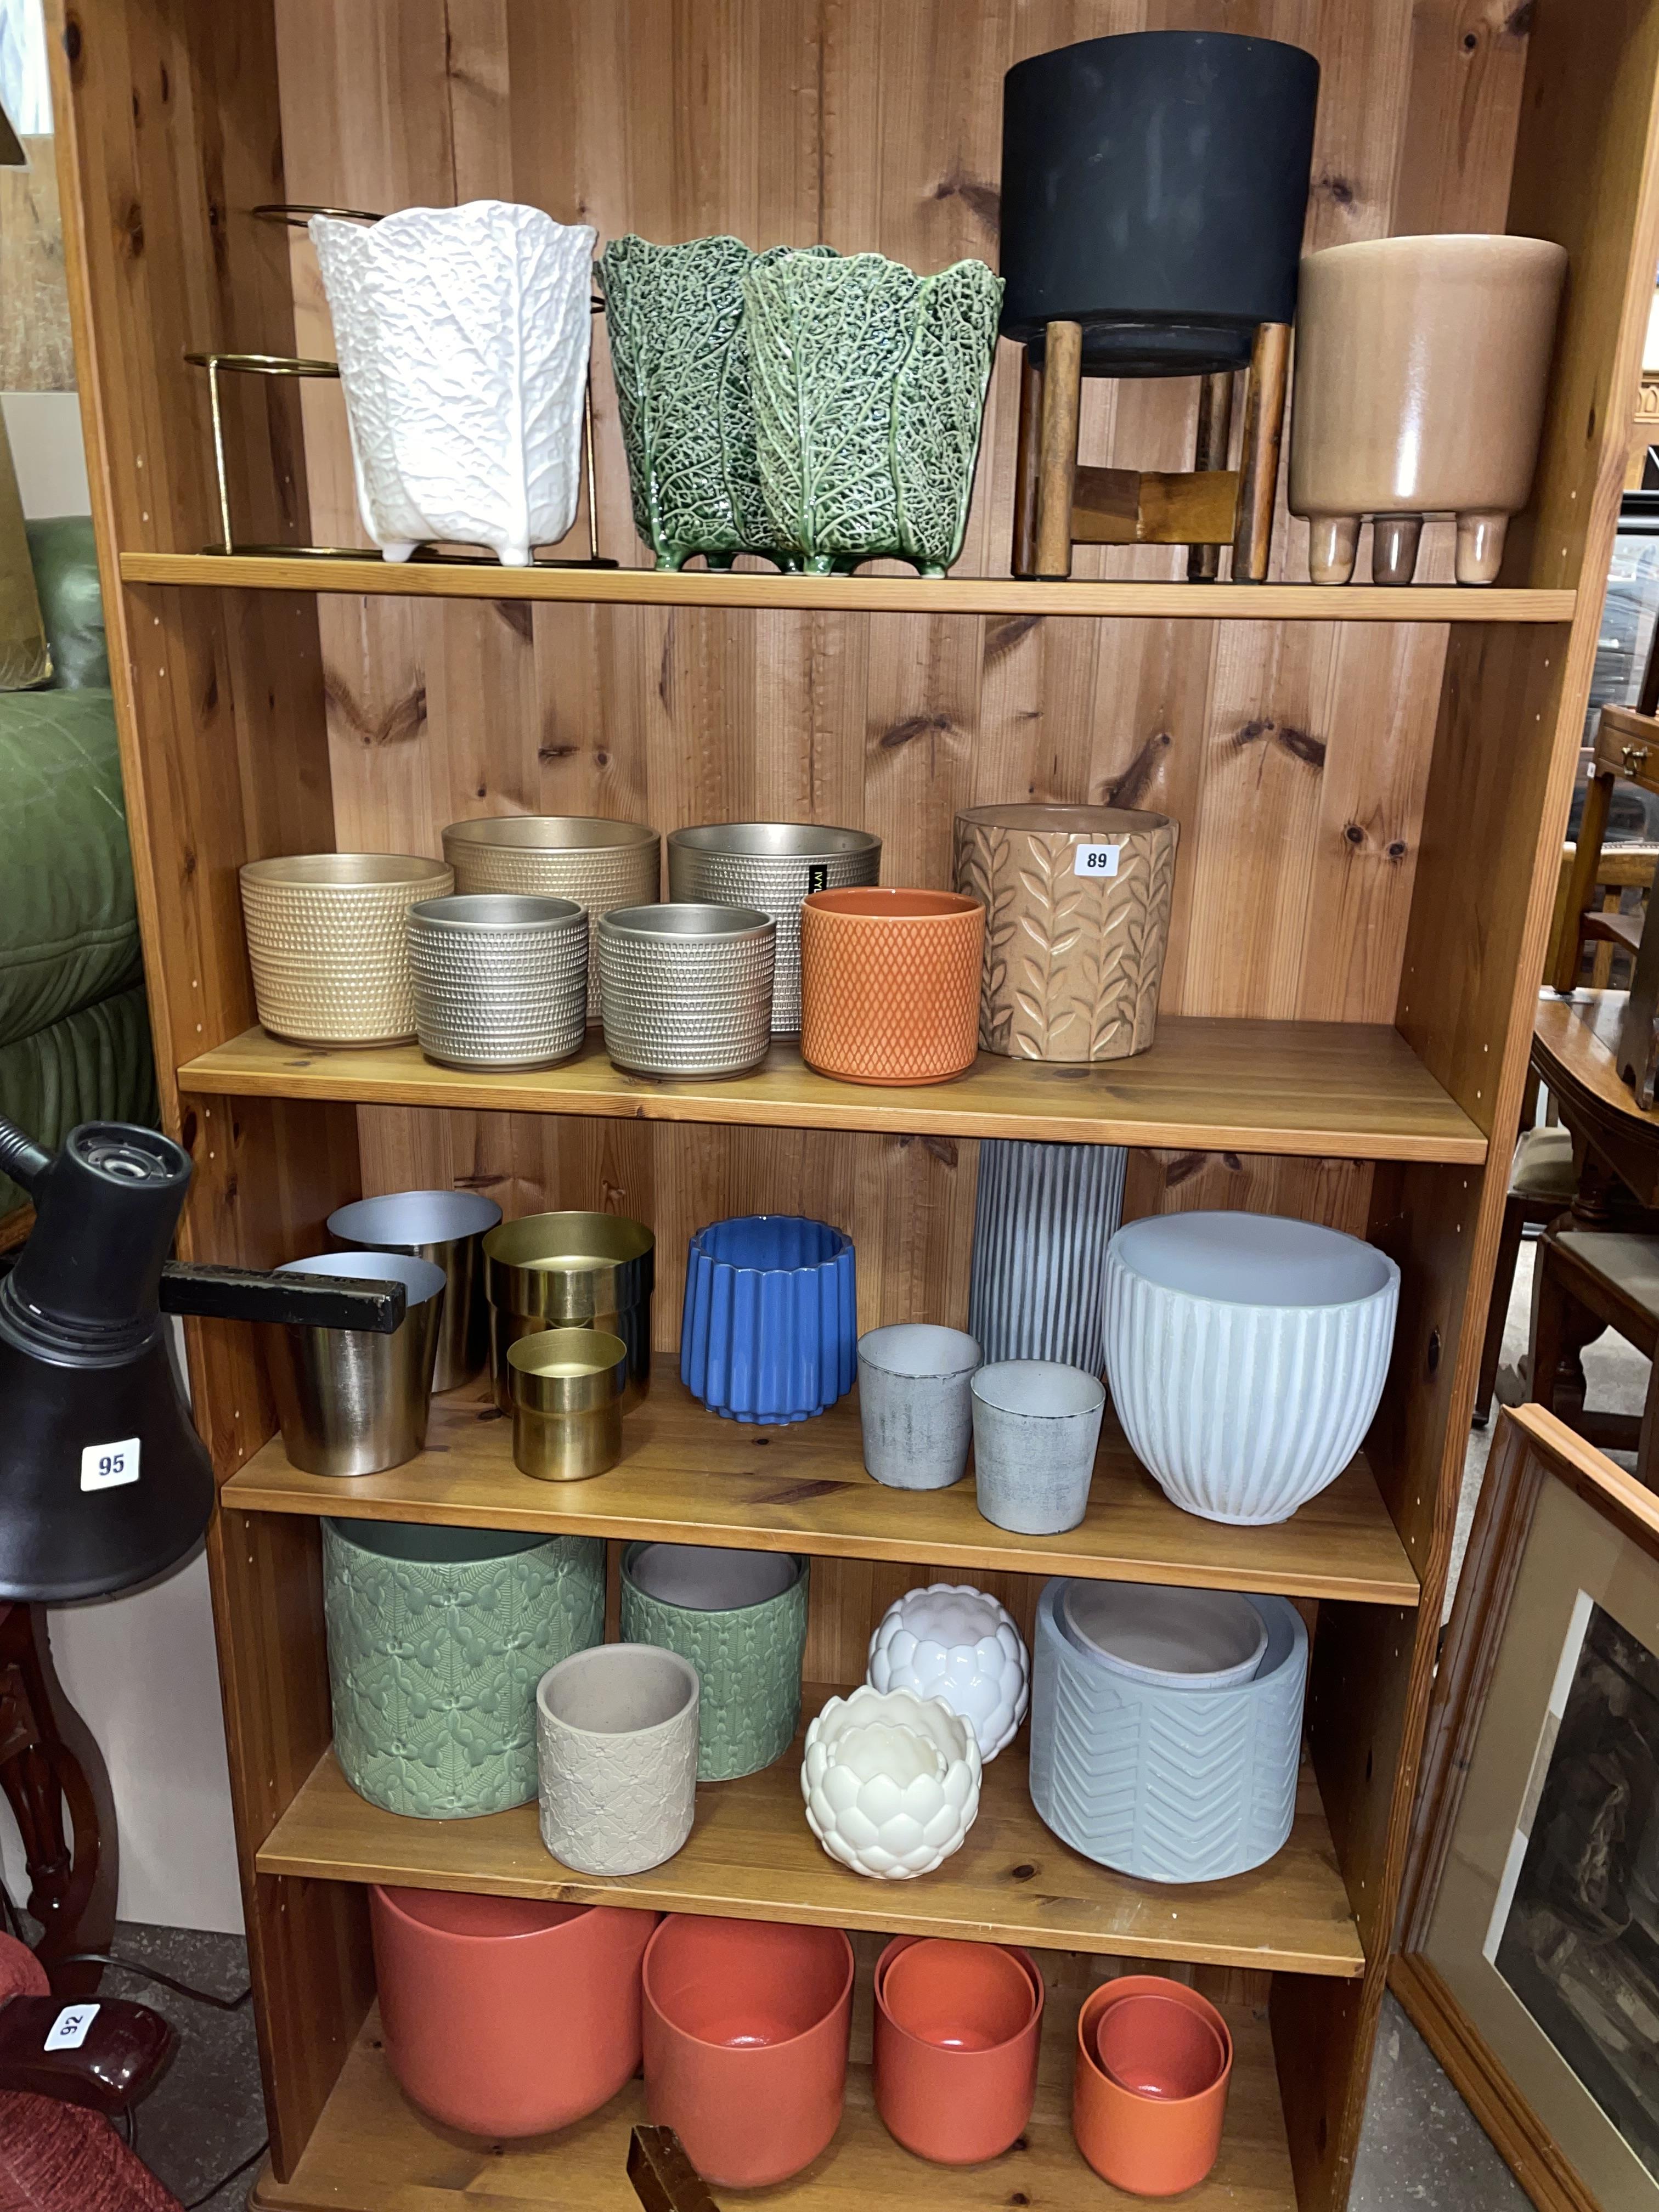 FIVE SHELVES OF VARIOUS CERAMIC AND METAL PLANTERS,